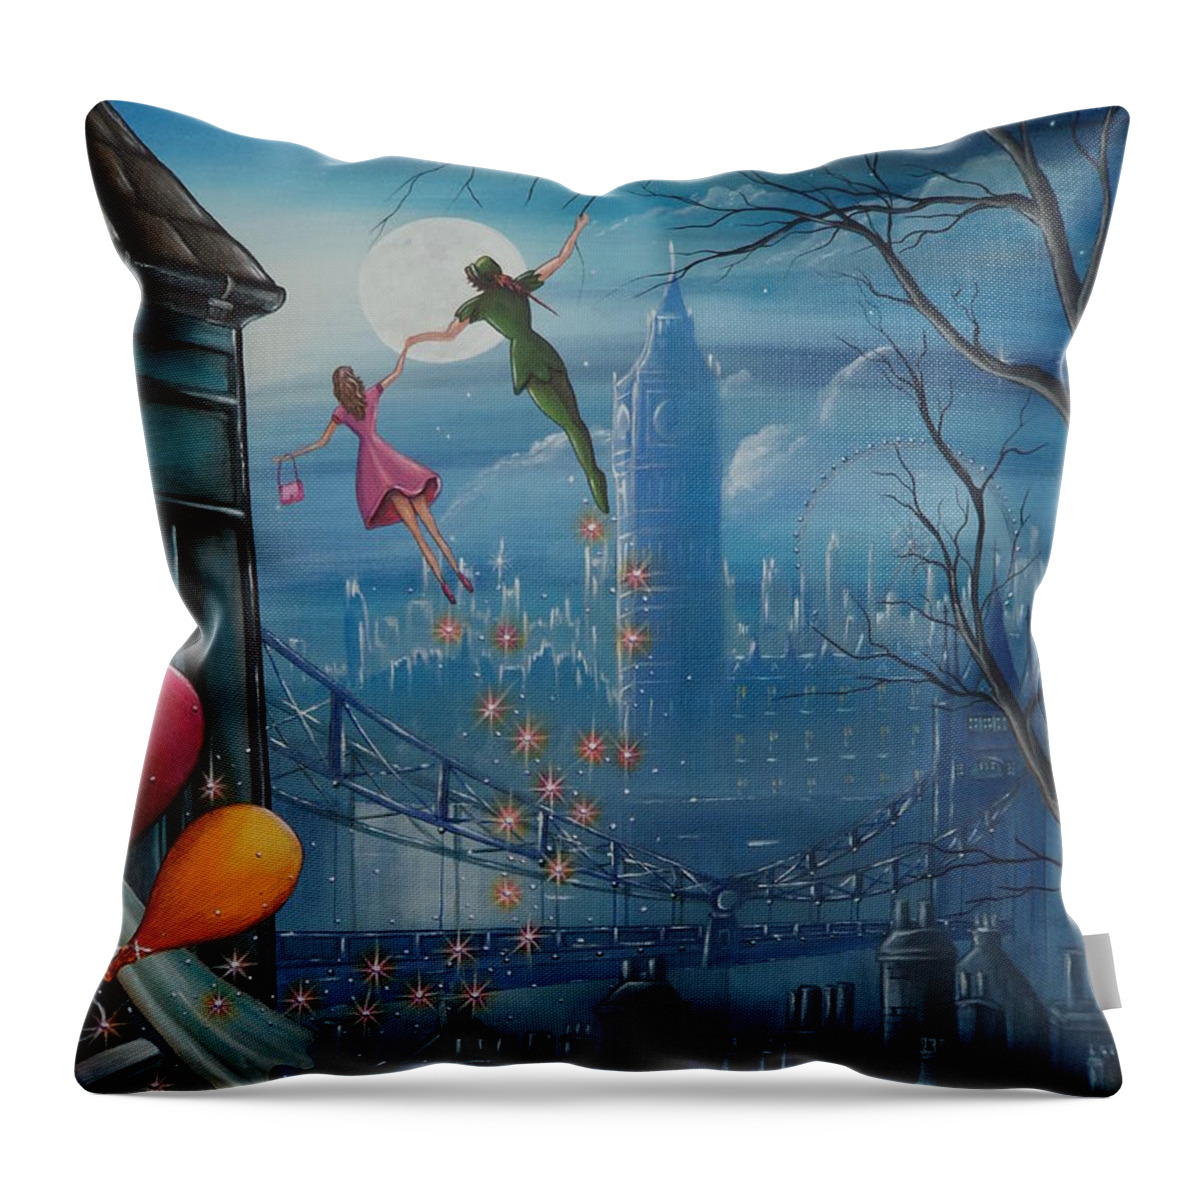 London Throw Pillow featuring the painting Corinna's Birthday Flight by Krystyna Spink